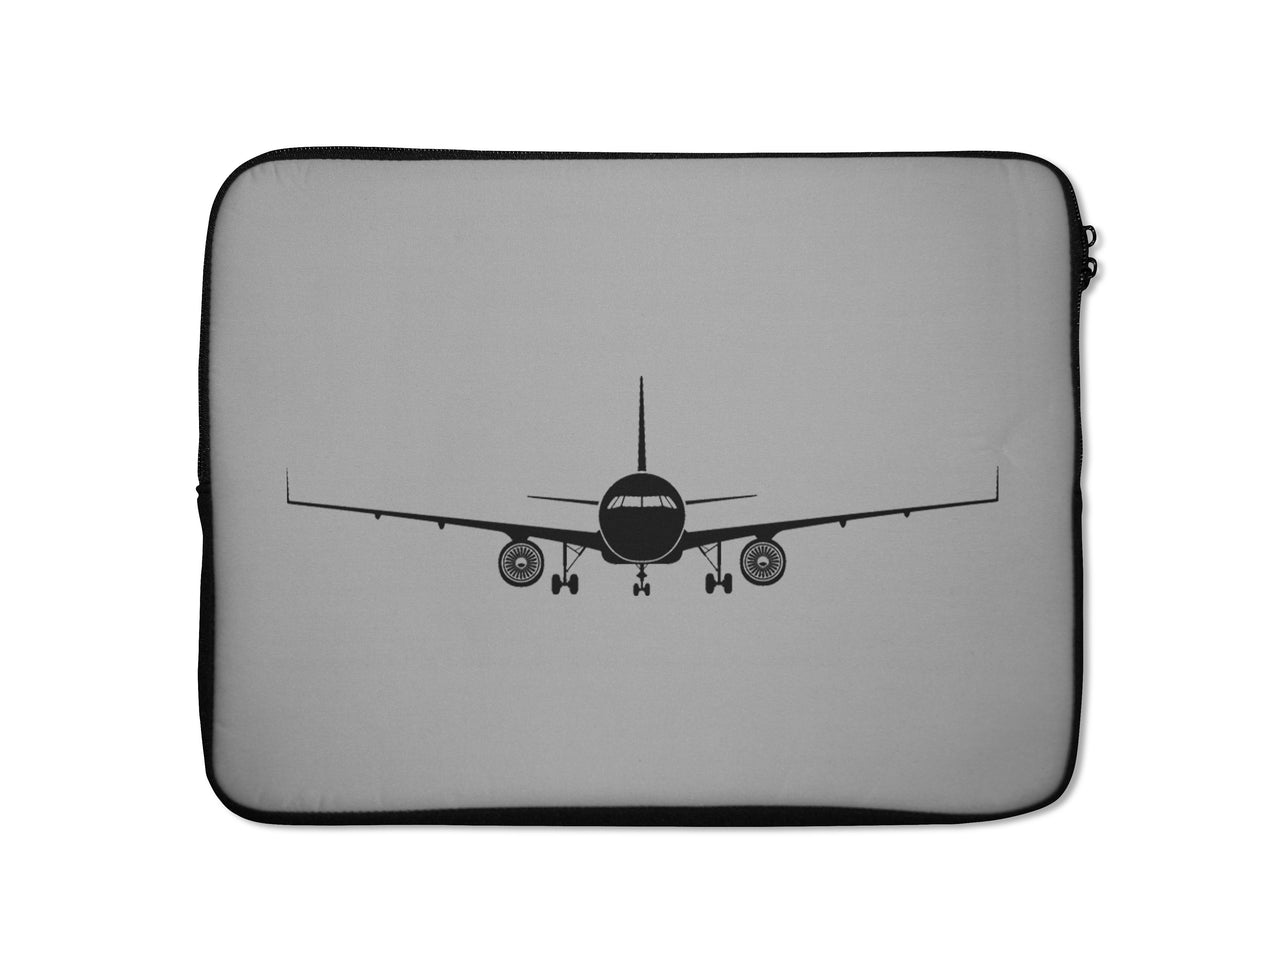 Airbus A320 Silhouette Designed Laptop & Tablet Cases